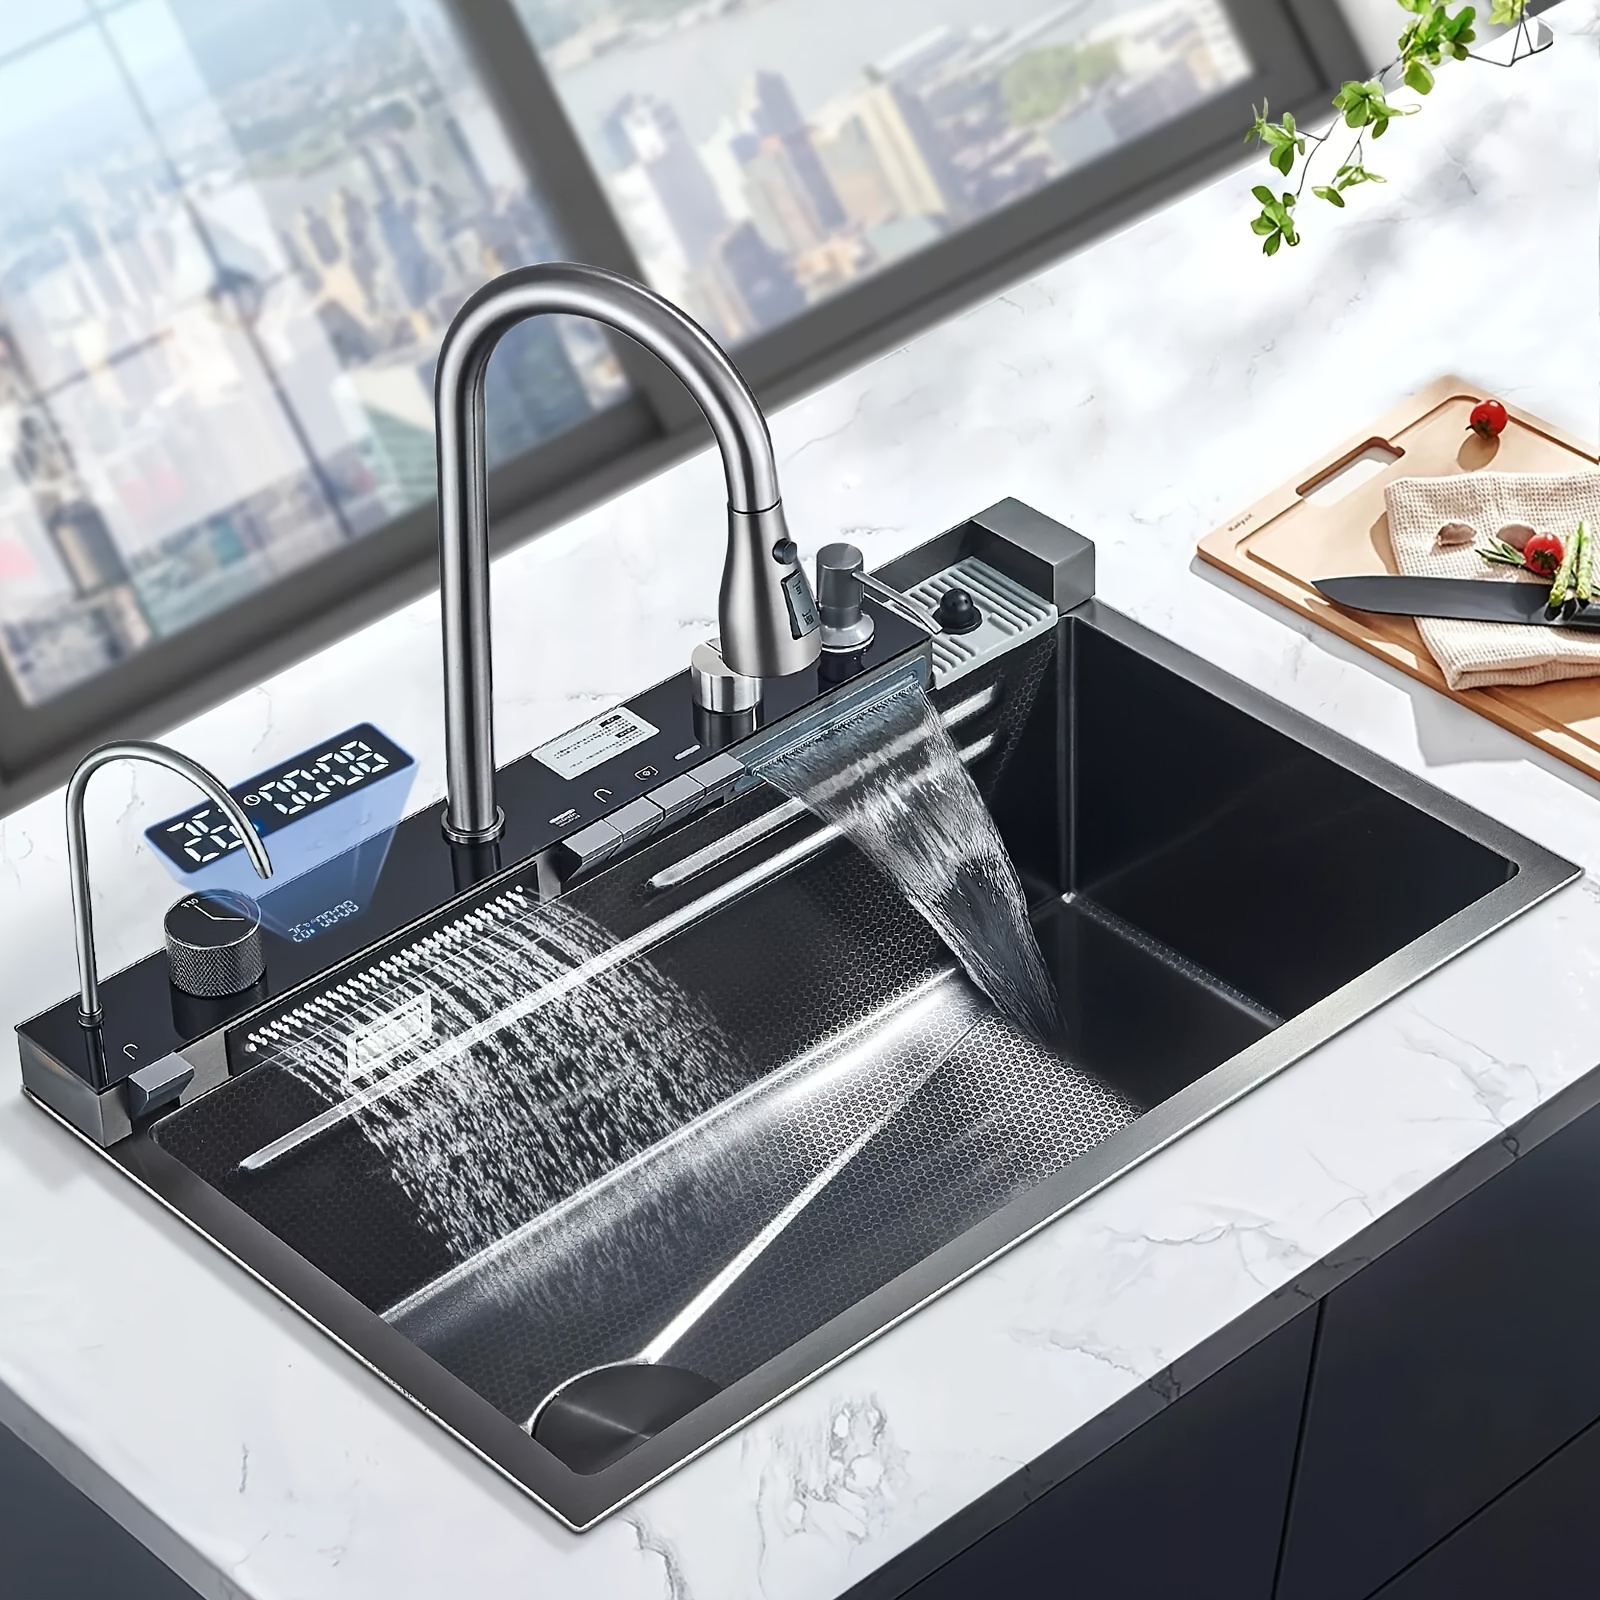 

Kitchen Sink With Mixer Faucets Stainless Steel Waterfall Drop In Kitchen Sink With Cup Washer, Stainless Steel Kitchen Sink Built-in Sink Waterfall Sink Tap Fitting